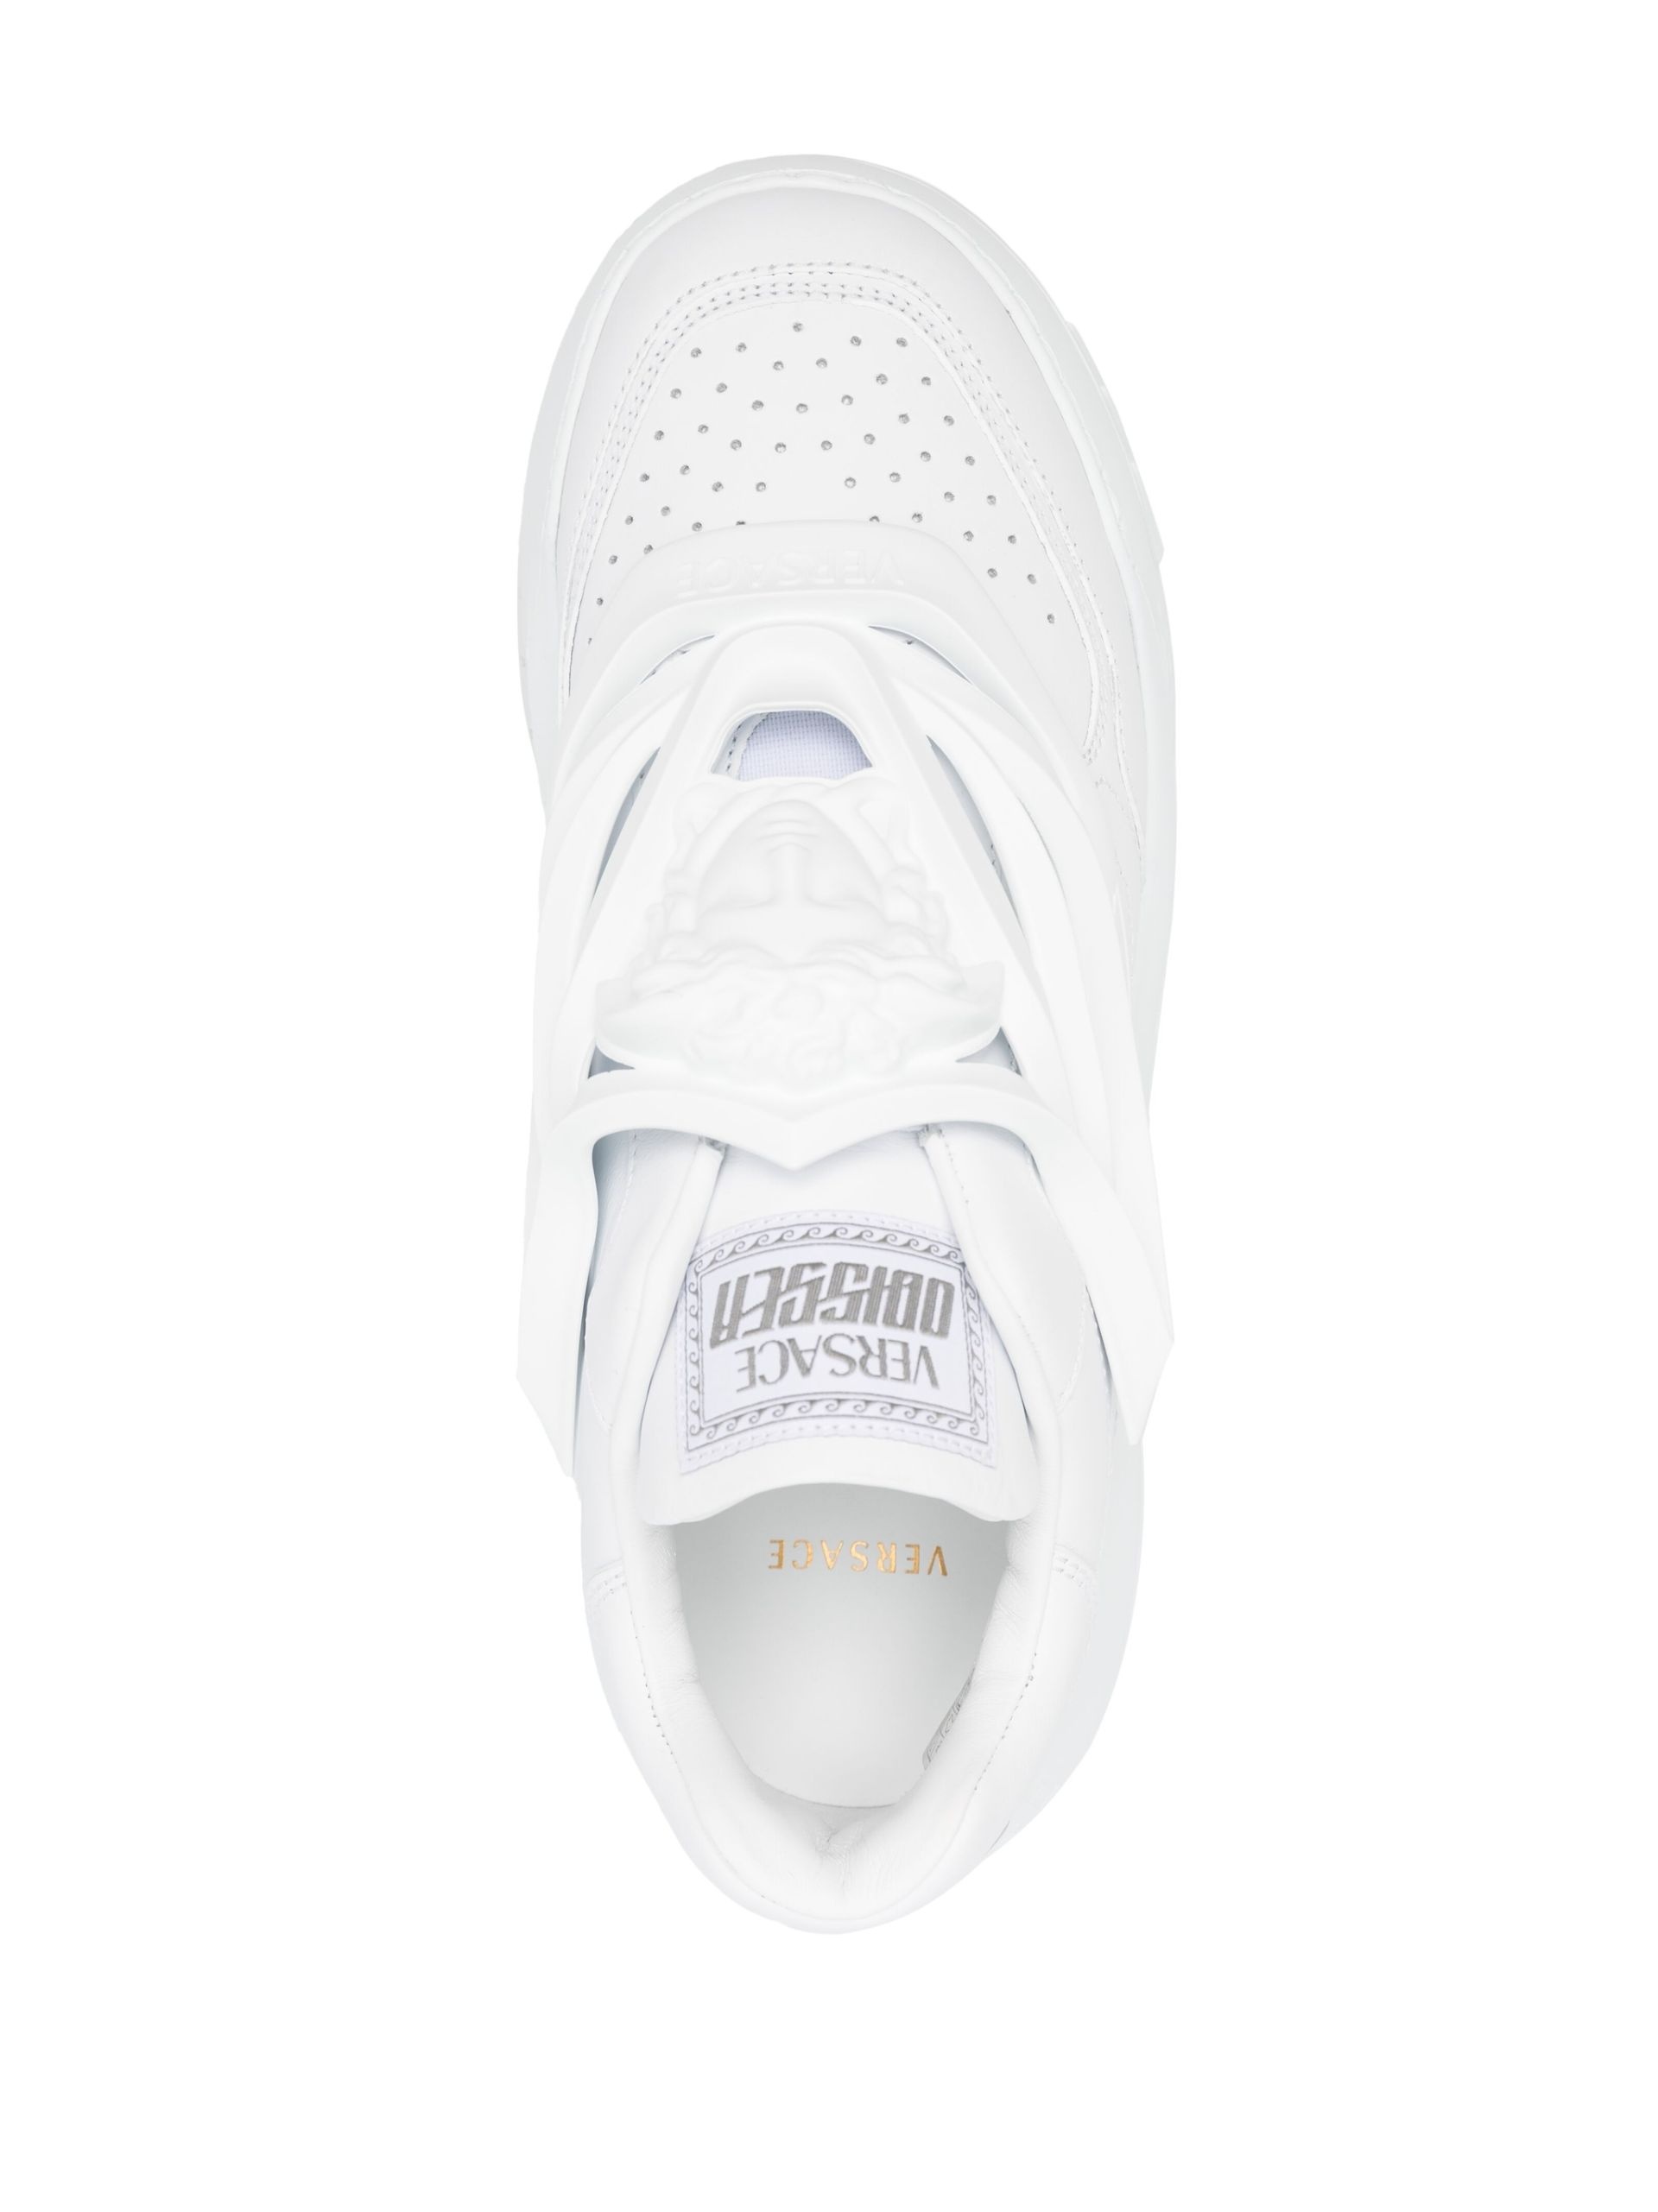 White Odissea Leather Sneakers - 4